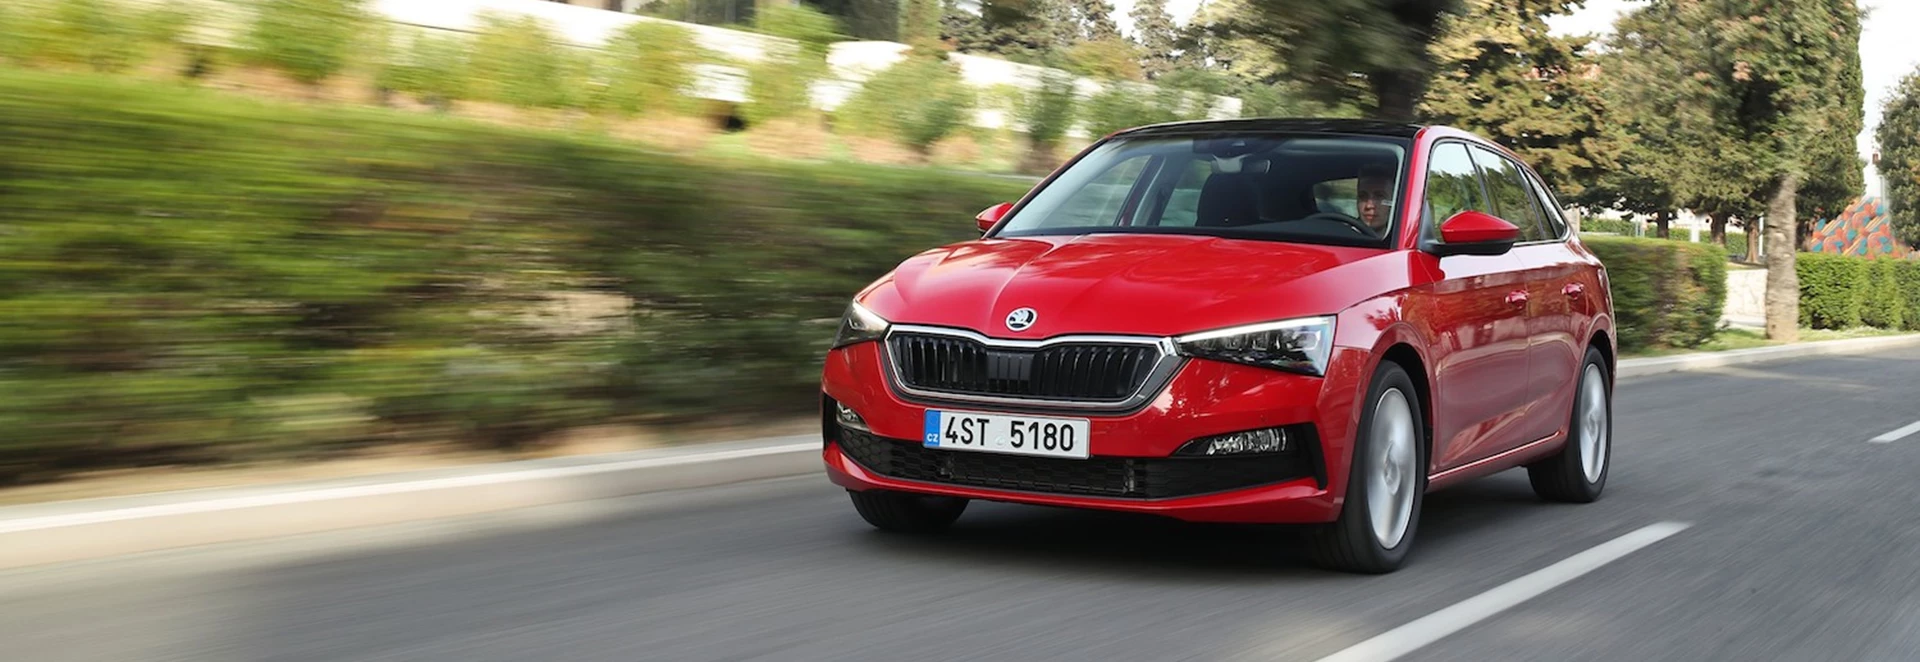 The 5 key features to know on the 2019 Skoda Scala